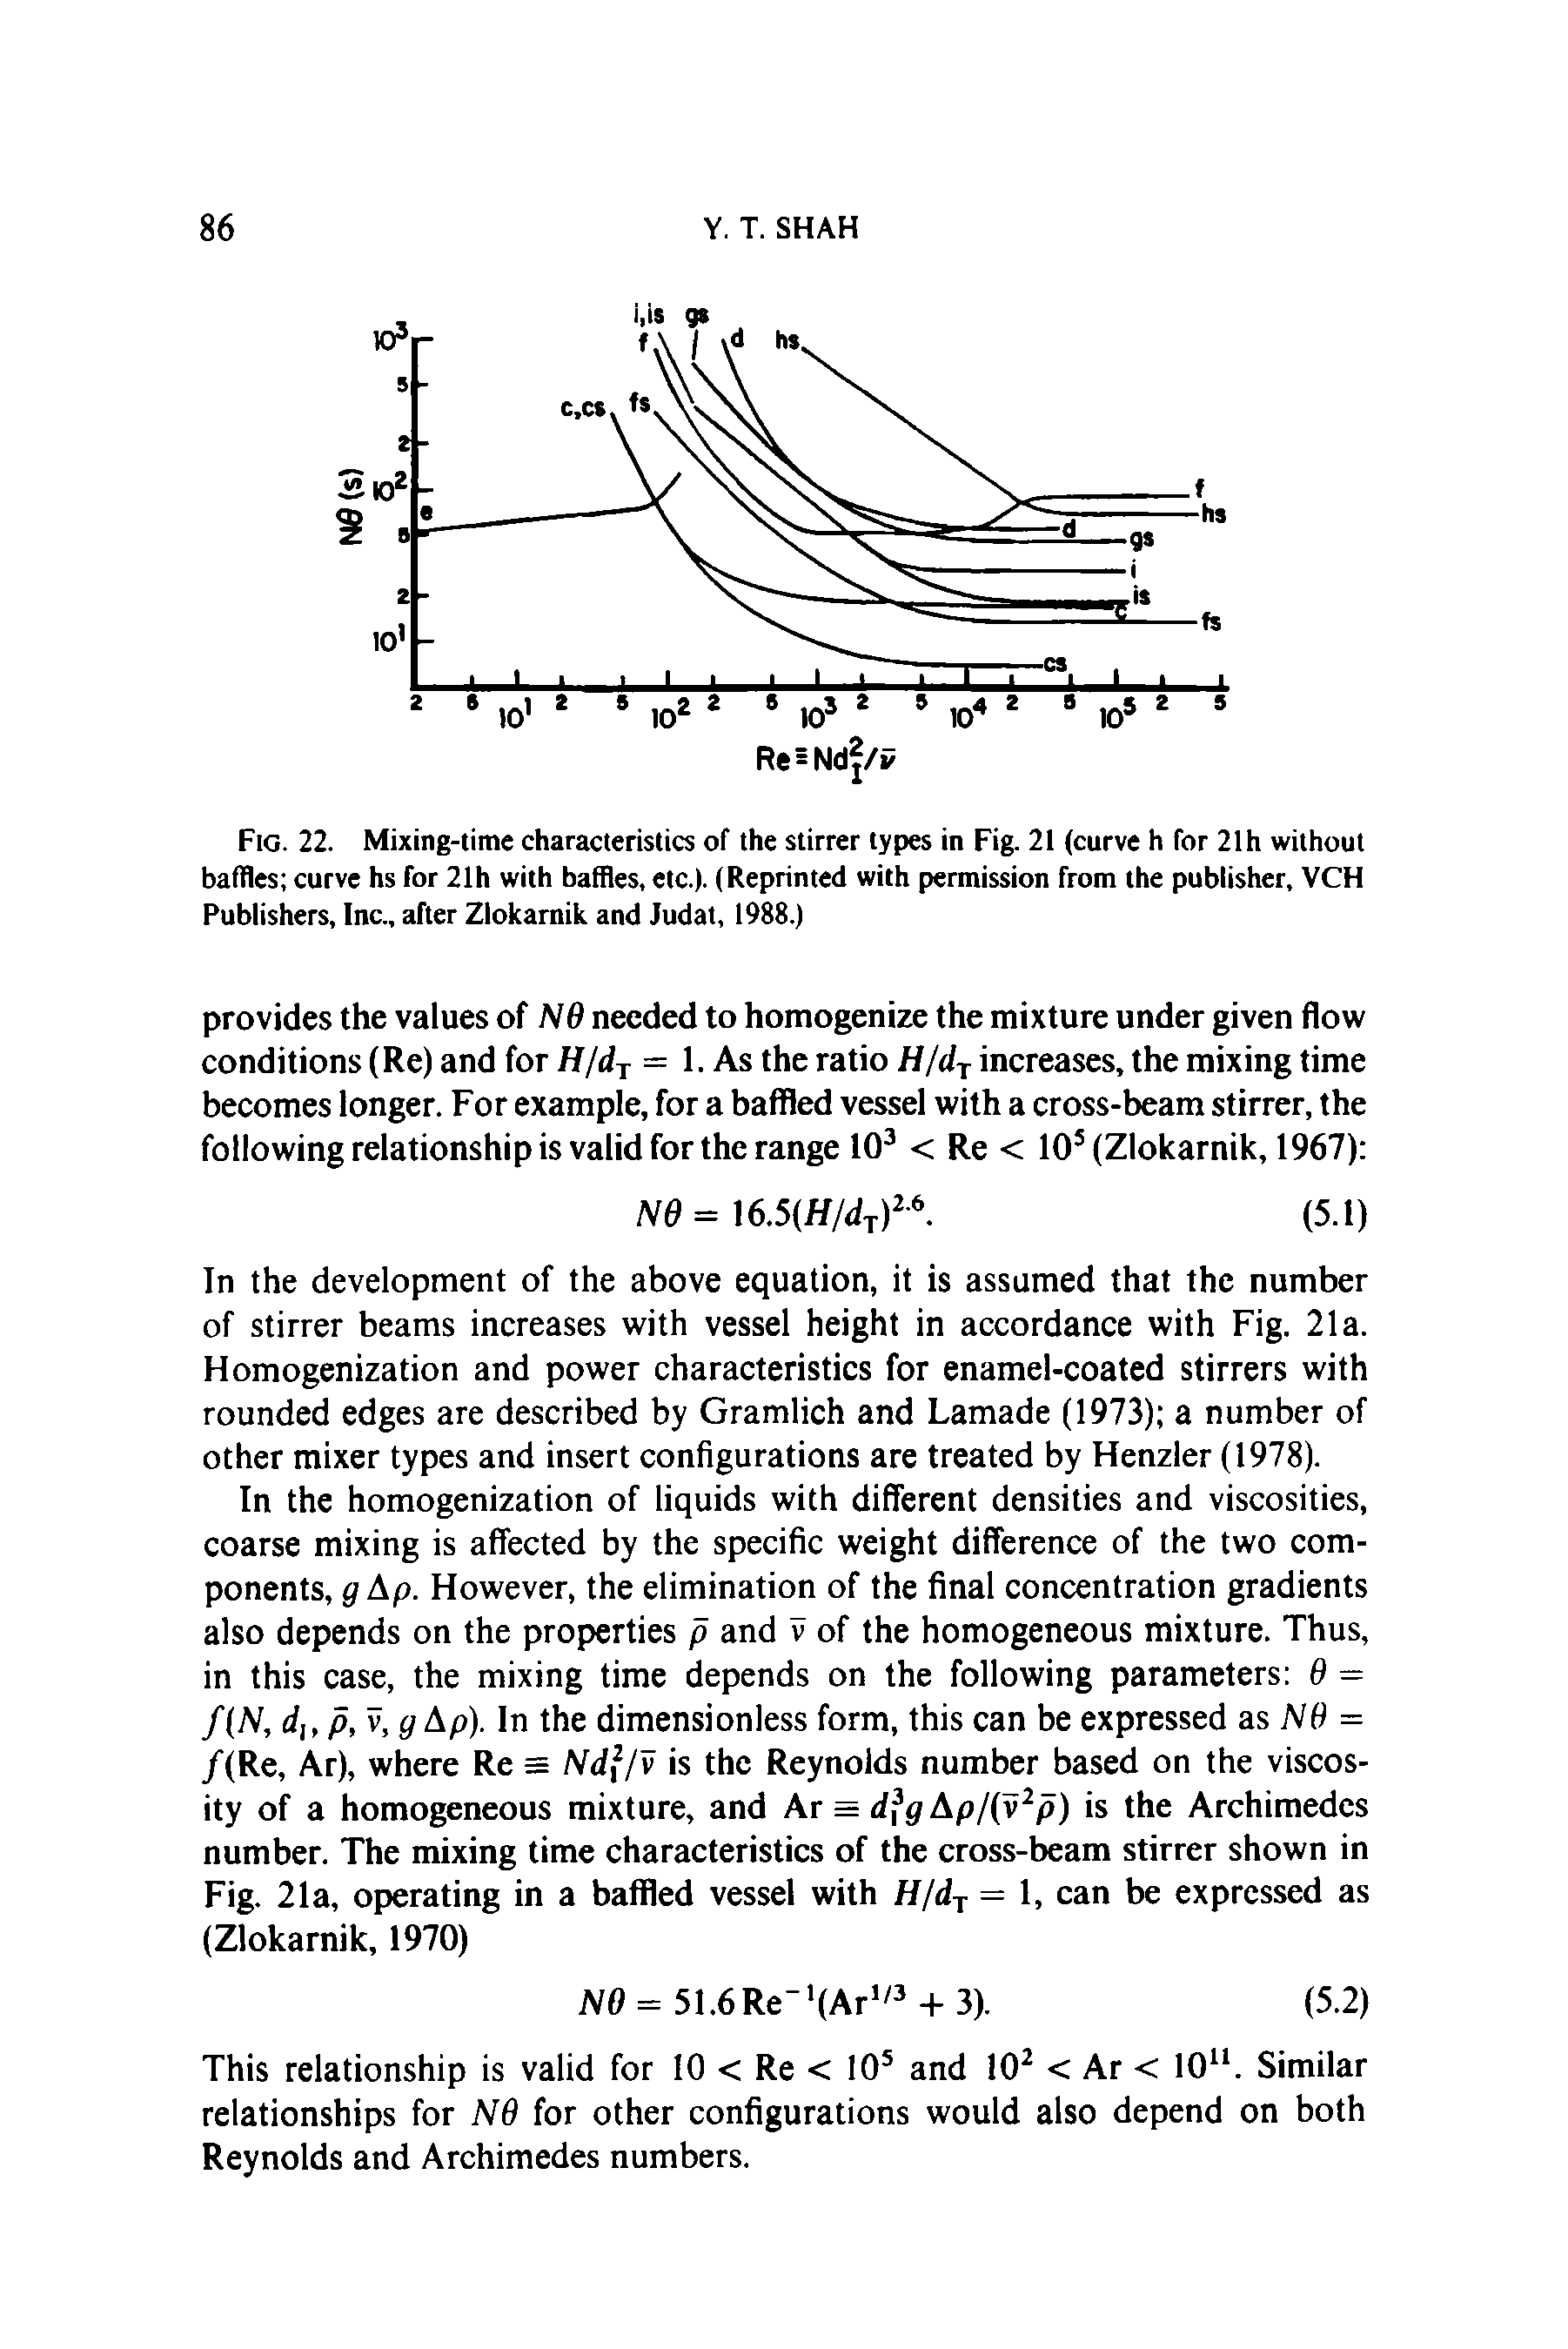 Fig. 22. Mixing-time characteristics of the stirrer types in Fig. 21 (curve h for 21h without baffles curve hs for 21h with baffles, etc.). (Reprinted with permission from the publisher, VCH Publishers, Inc., after Zlokarnik and Judat, 1988.)...